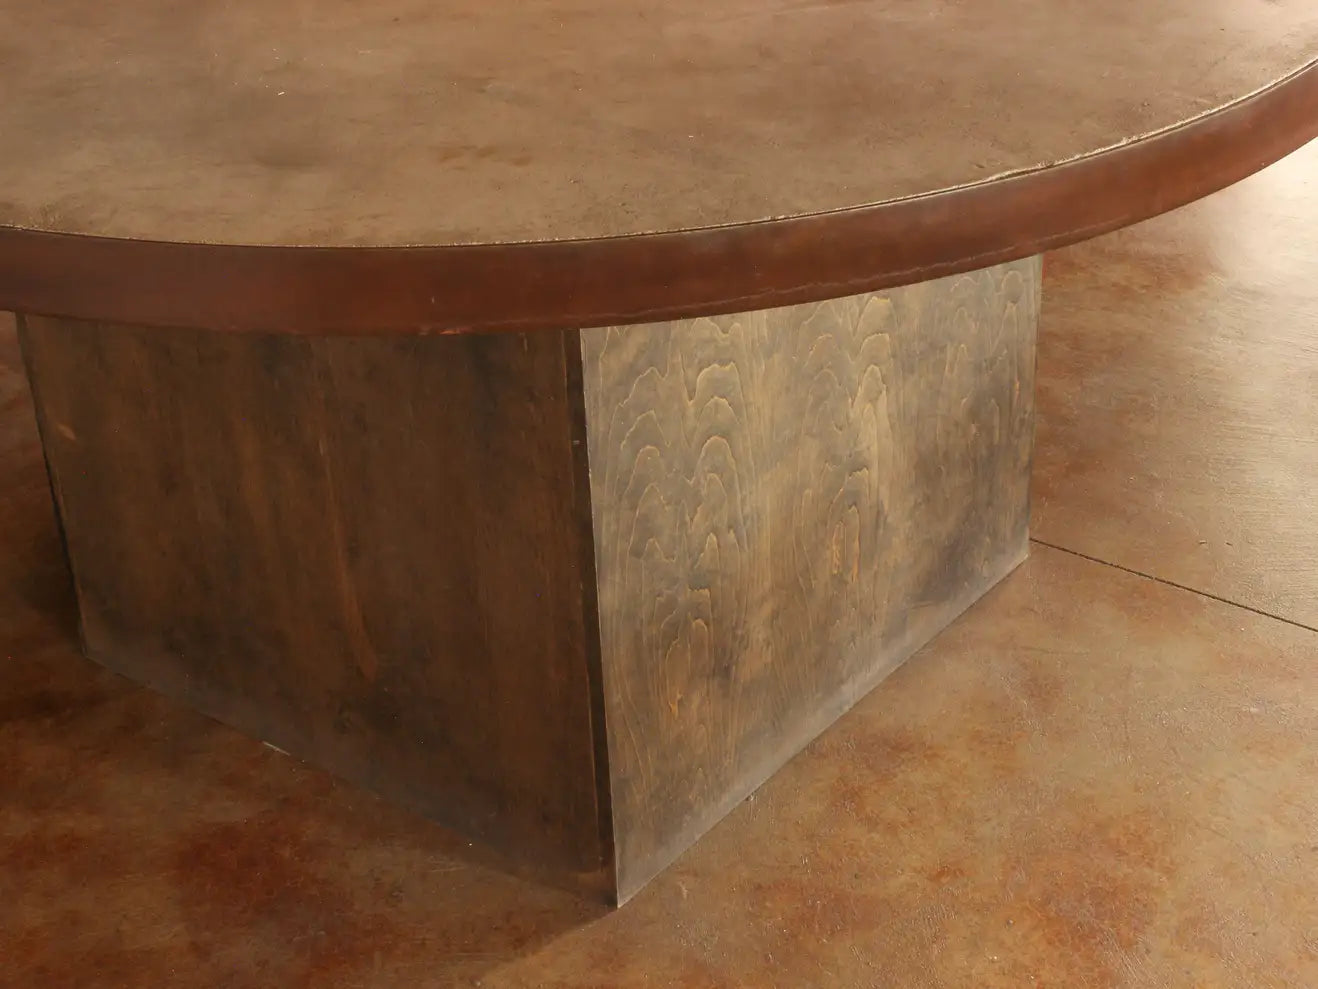 Round Pedestal Dining Table with Concrete Top